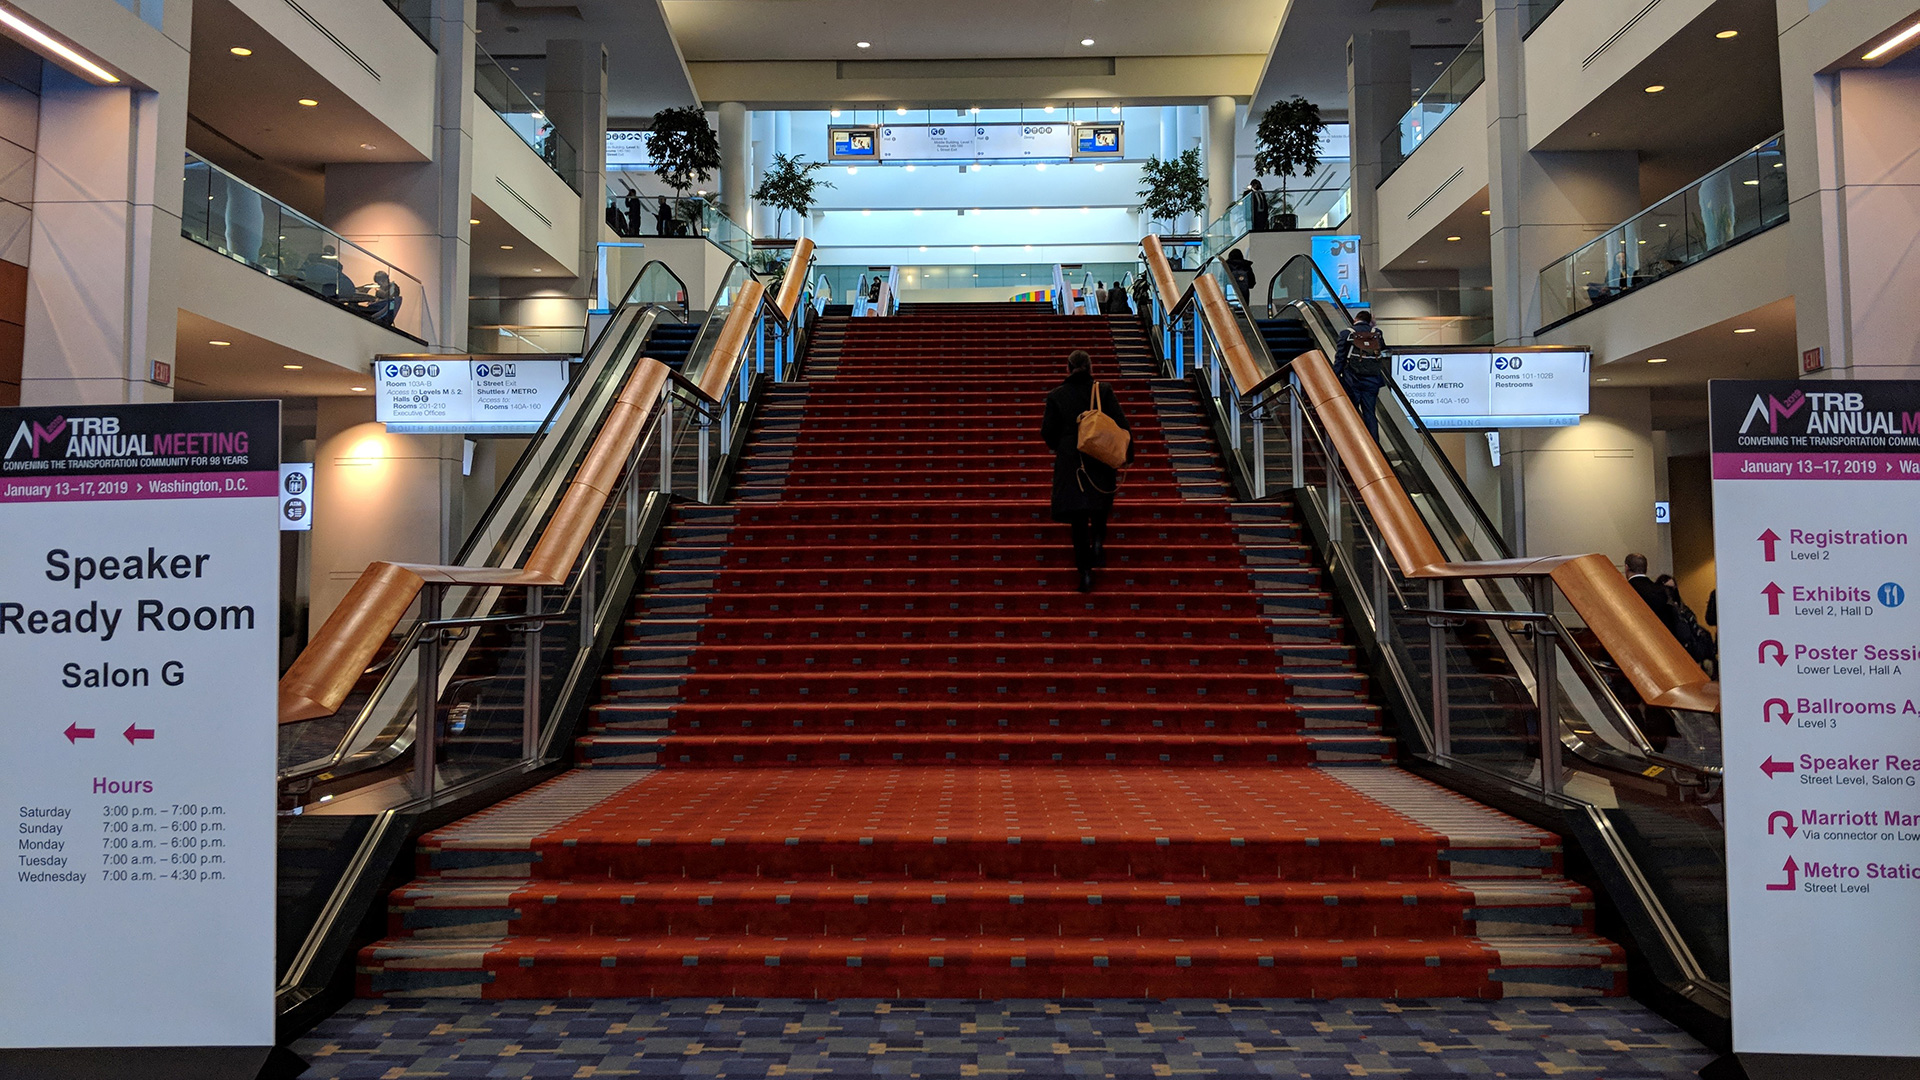 TRB Annual Meeting was held at the Walter E Washington Convention Center